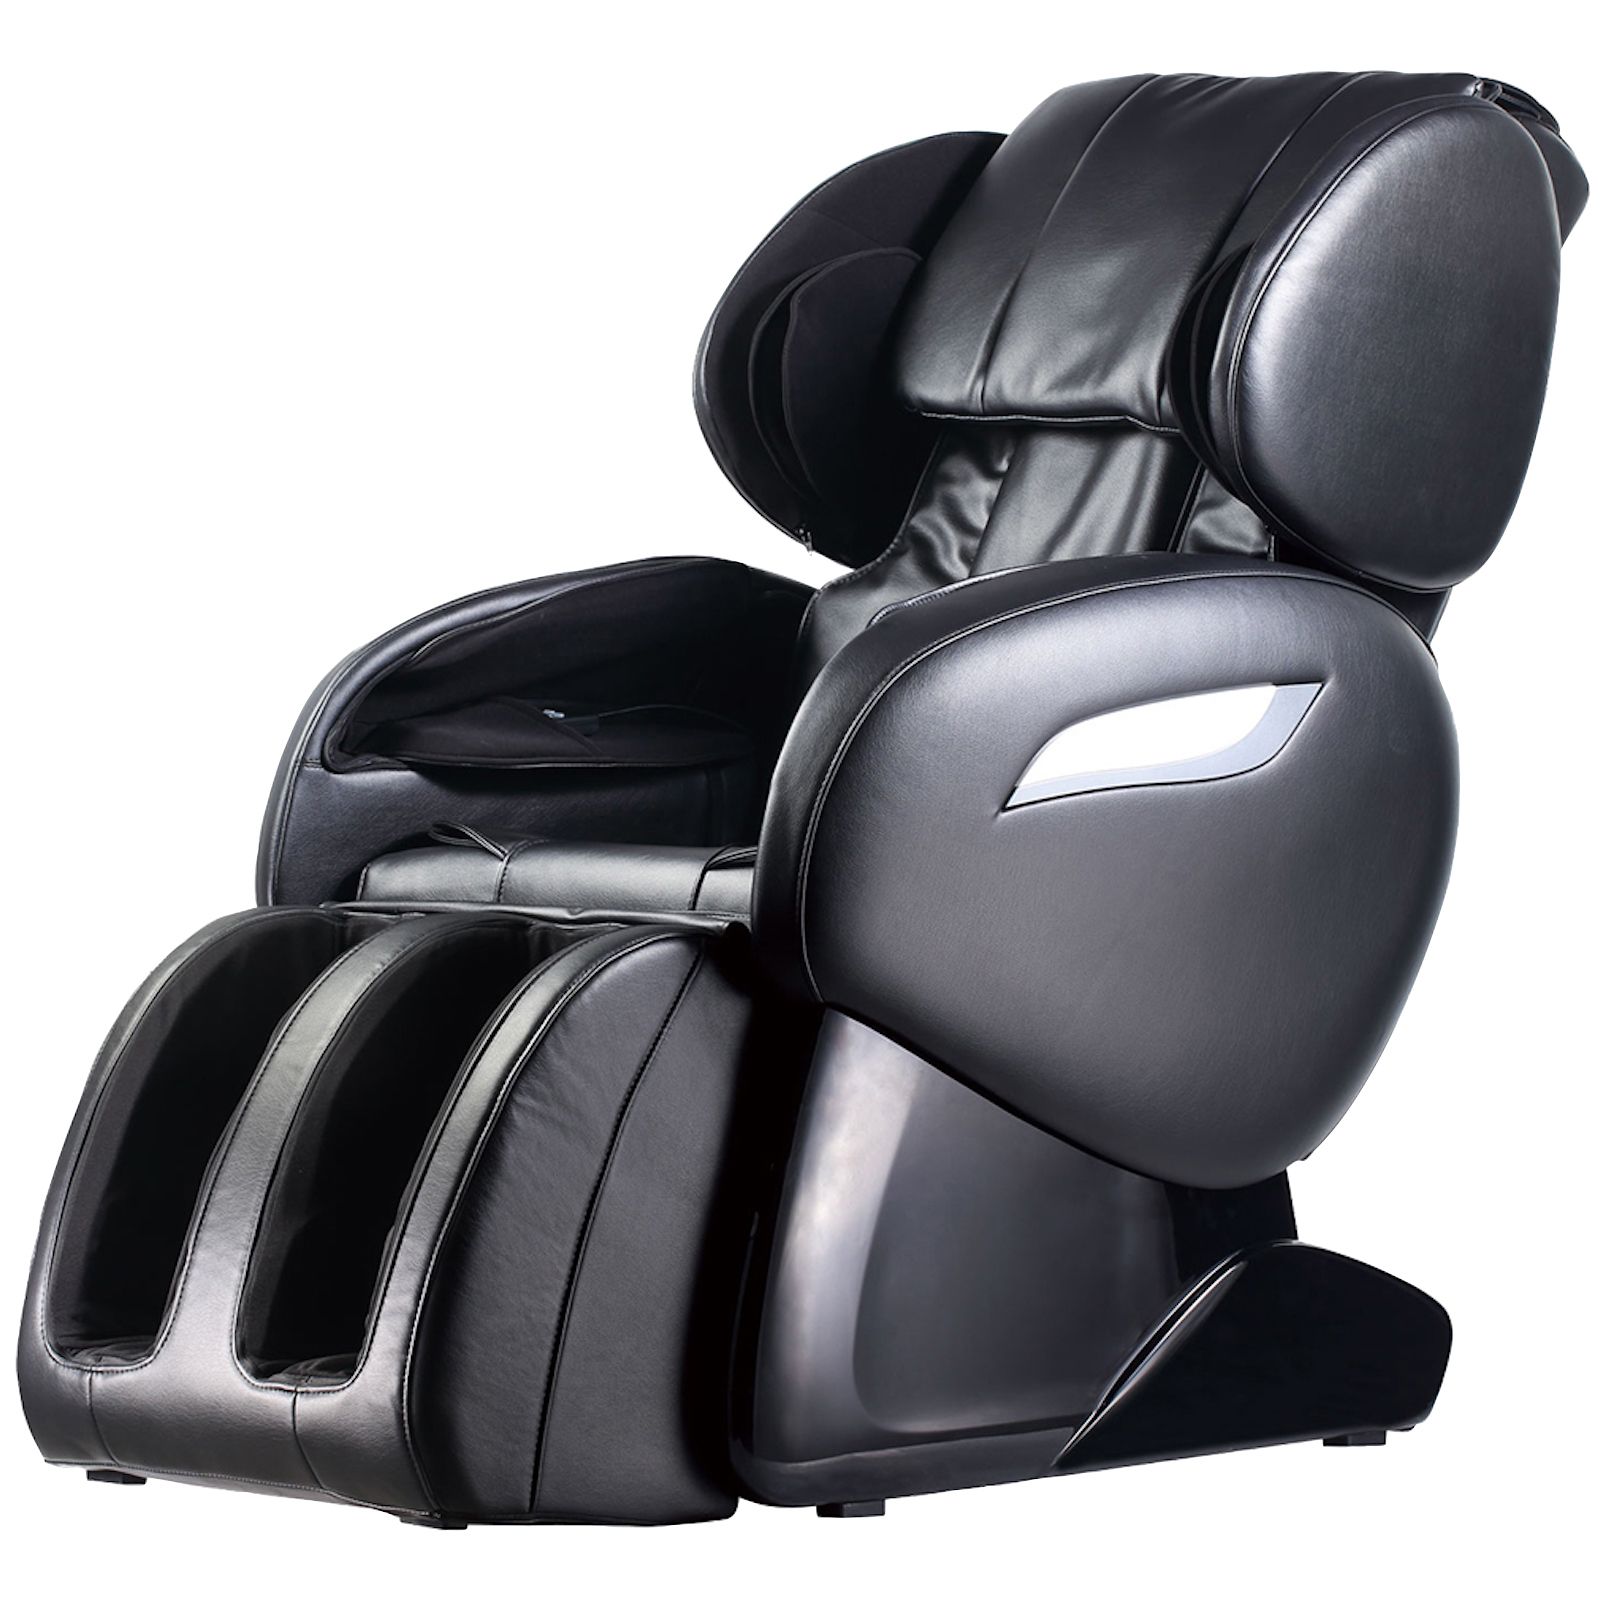 8 Mode Massage Chair Pad With Heated Back Neck Cushion For Car